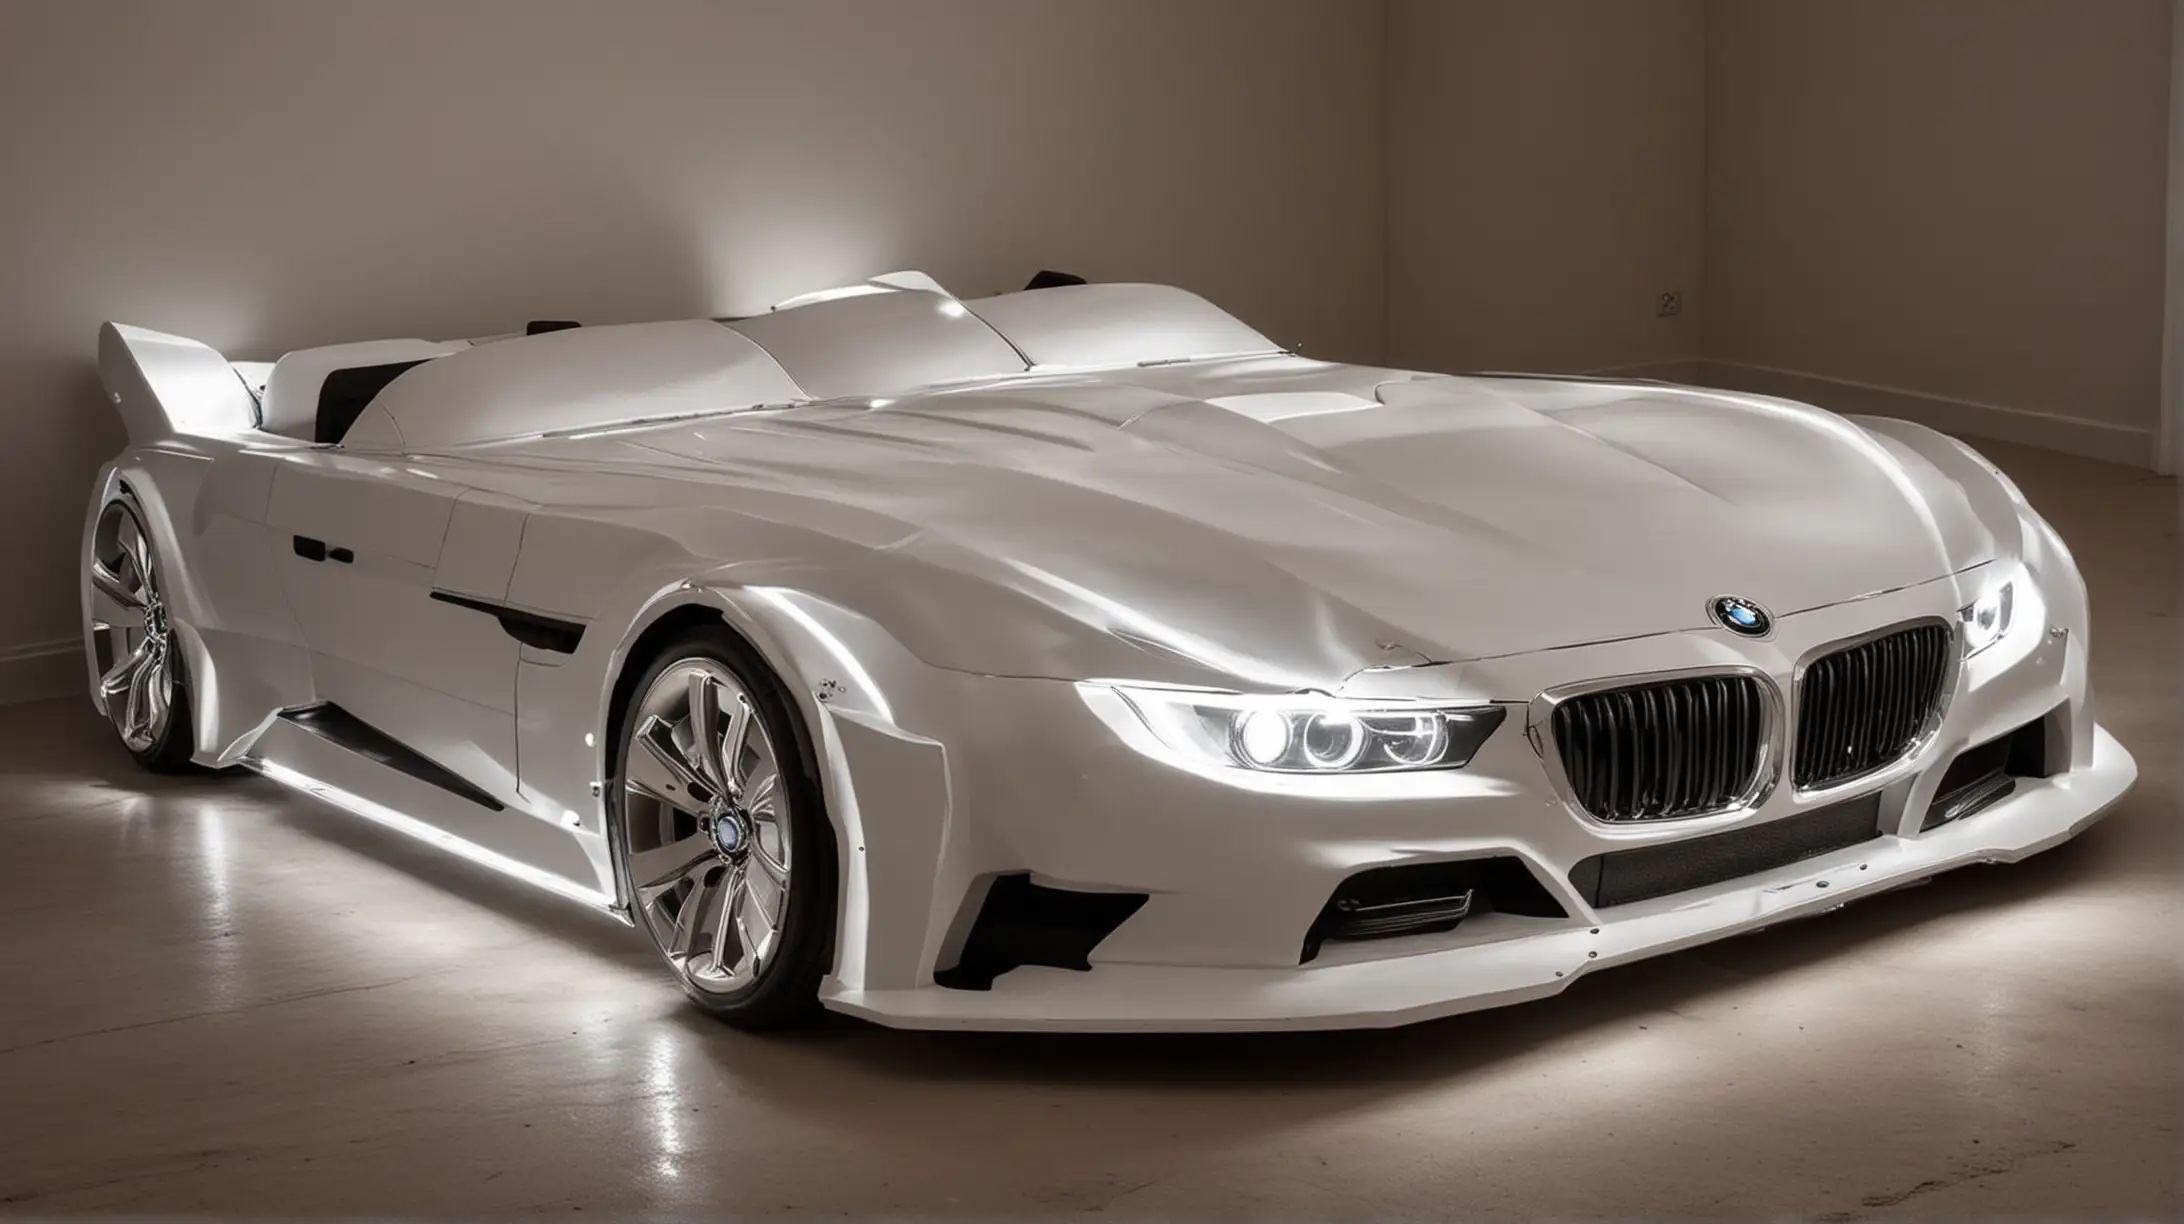 Double bed in the shape of a BMW car with headlights on 